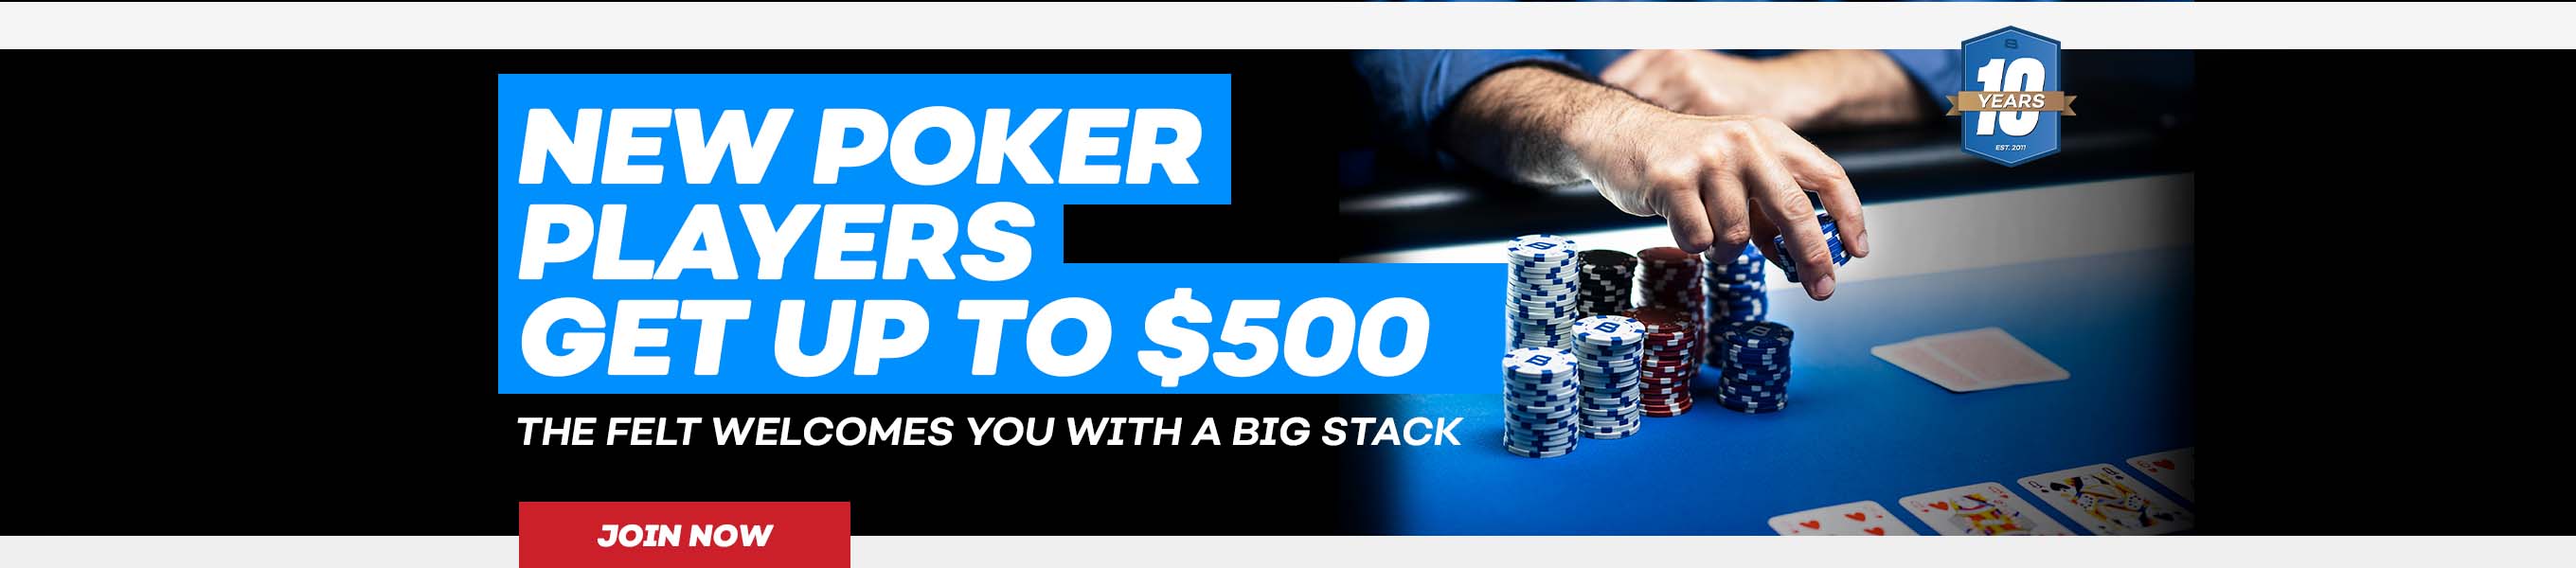 New Poker Players Get Up To $500